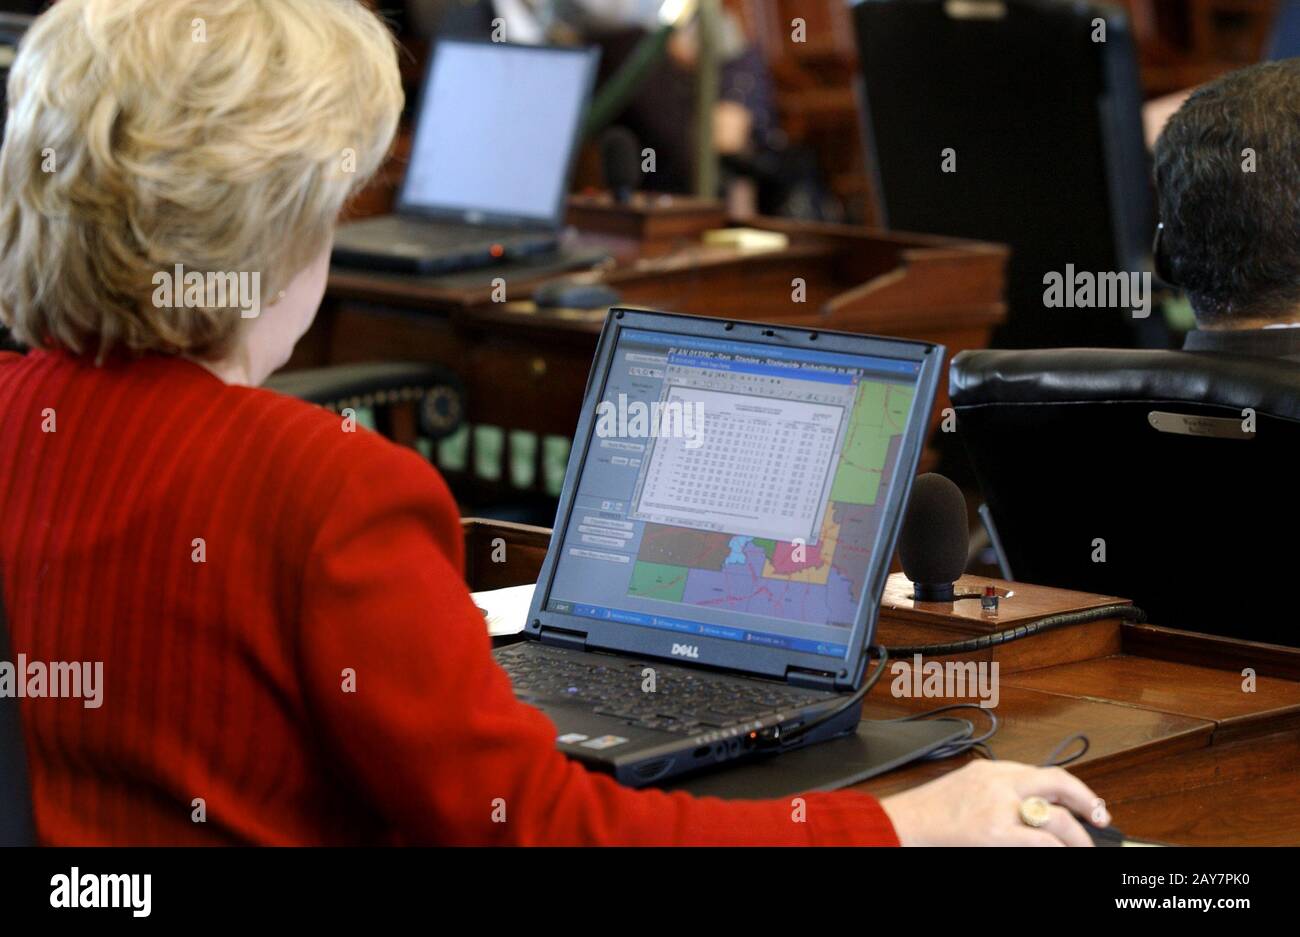 Austin, Texas July 21, 2003:  During special session of the Texas Legislature to consider a redistricting bill intended to give more of a Republican majority to U.S. Congress,  Sen. Jane Nelson reads her redistricting map on her laptop computer at her desk on the Senate floor. ©Bob Daemmrich Stock Photo